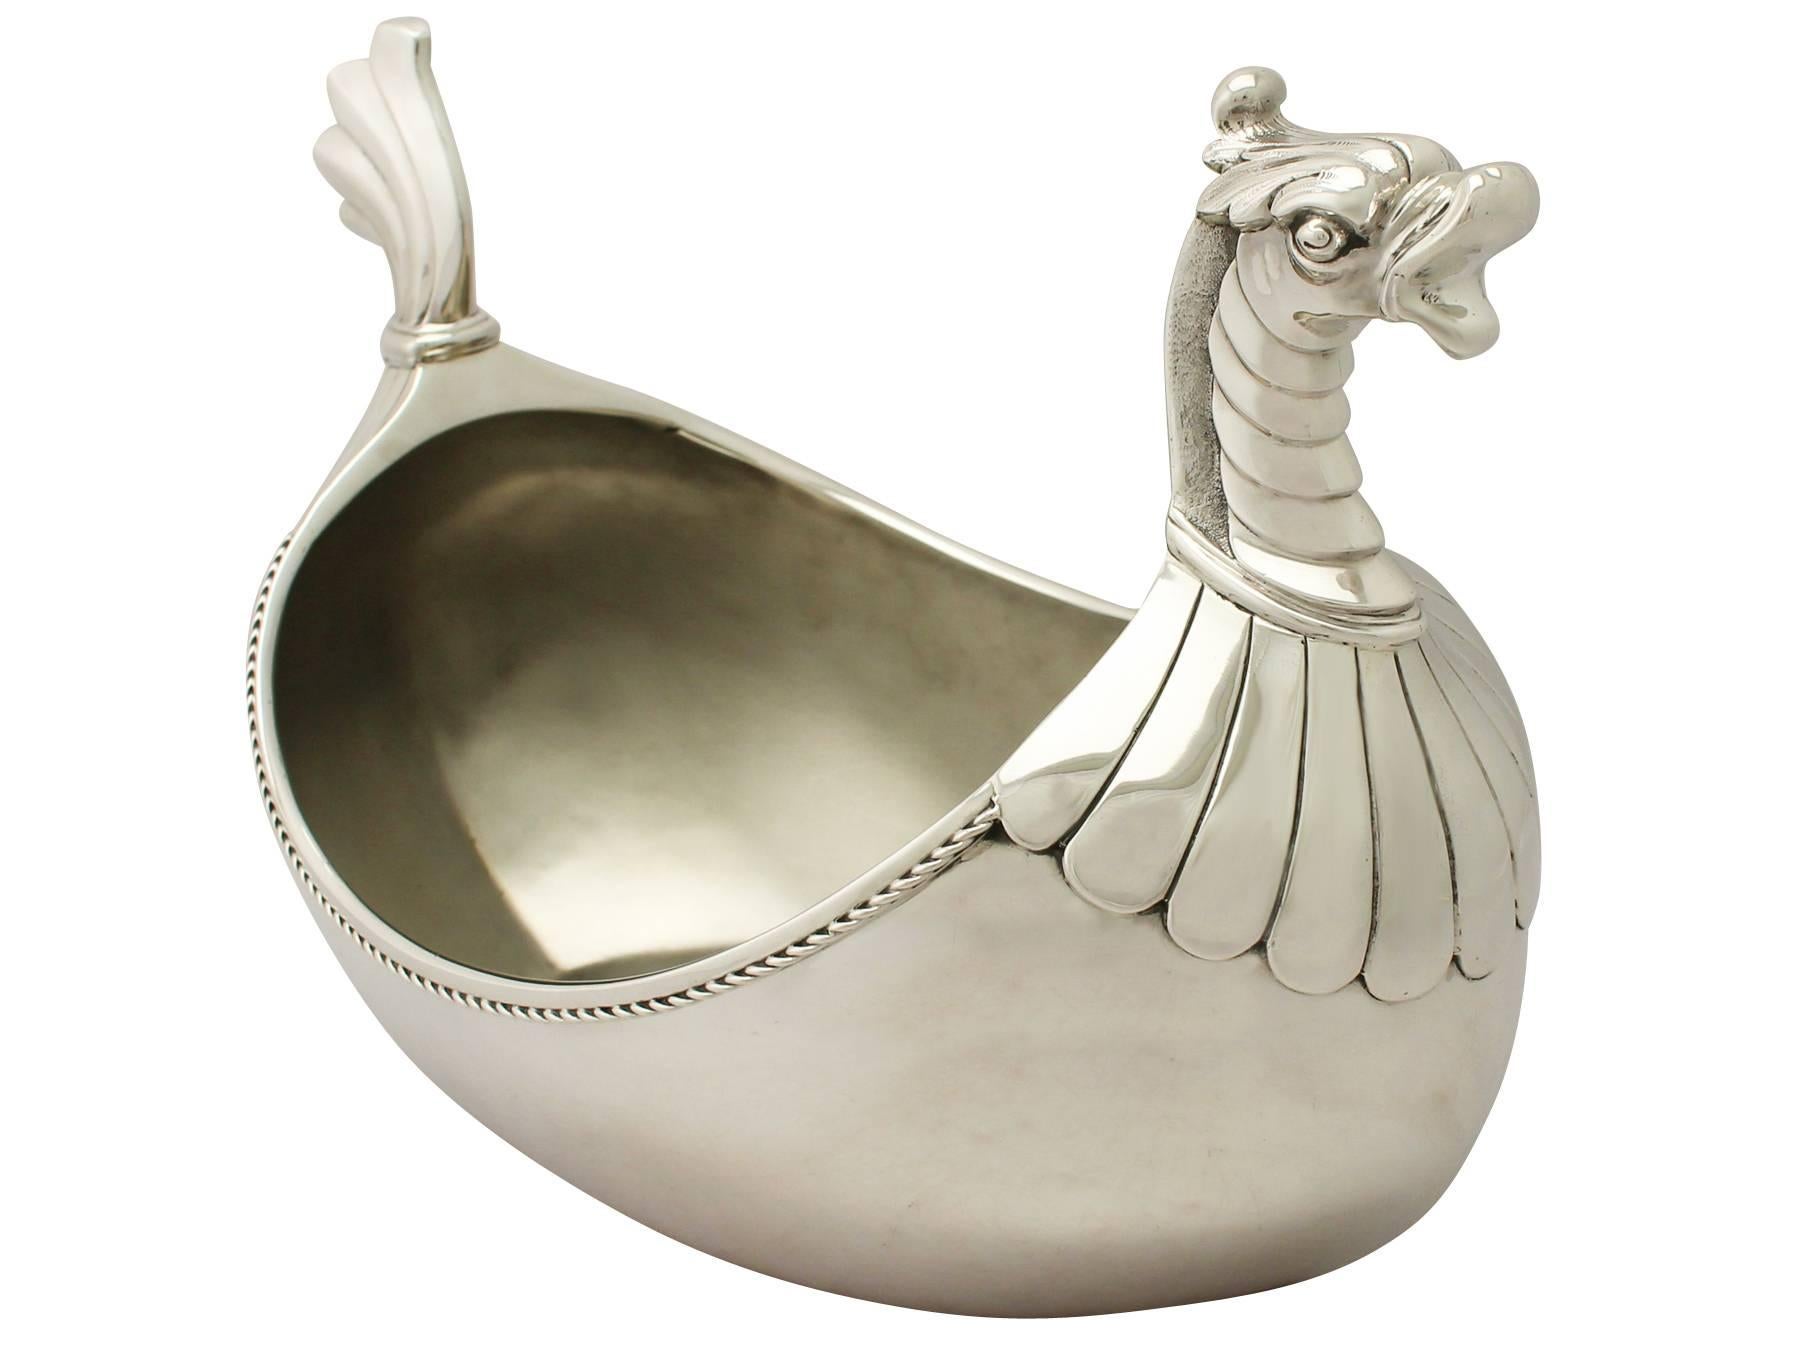 A magnificent, fine and impressive, unusual, large antique Edwardian English sterling silver centerpiece bowl, an addition to our ornamental silverware collection.

This exceptional antique Edwardian sterling silver table centerpiece has a plain